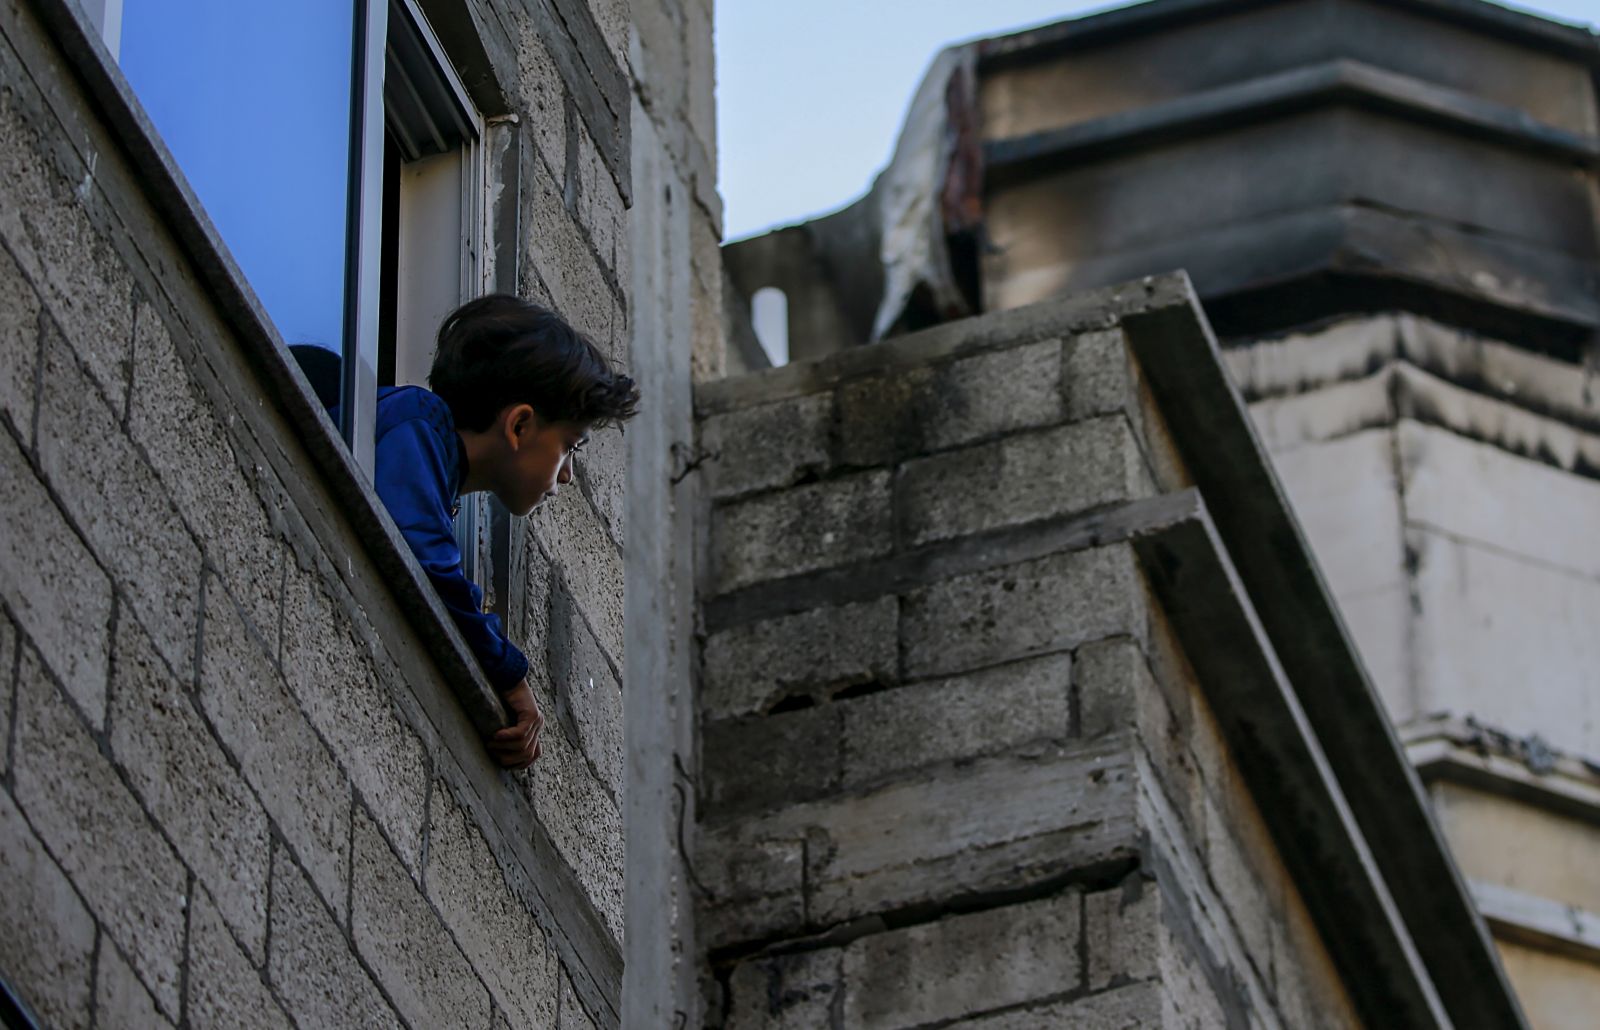 epa10312163 A Palestinian boy looks from the window of his house at a burned apartment on the third floor in the building in the east of the Jabaliya refugee camp, in the Gaza Strip, 18 November 2022. At least 21 Palestinians from the Abu Raiya family, including seven children, were killed in the fire, the Palestinian Health Ministry in Gaza said.  EPA/MOHAMMED SABER